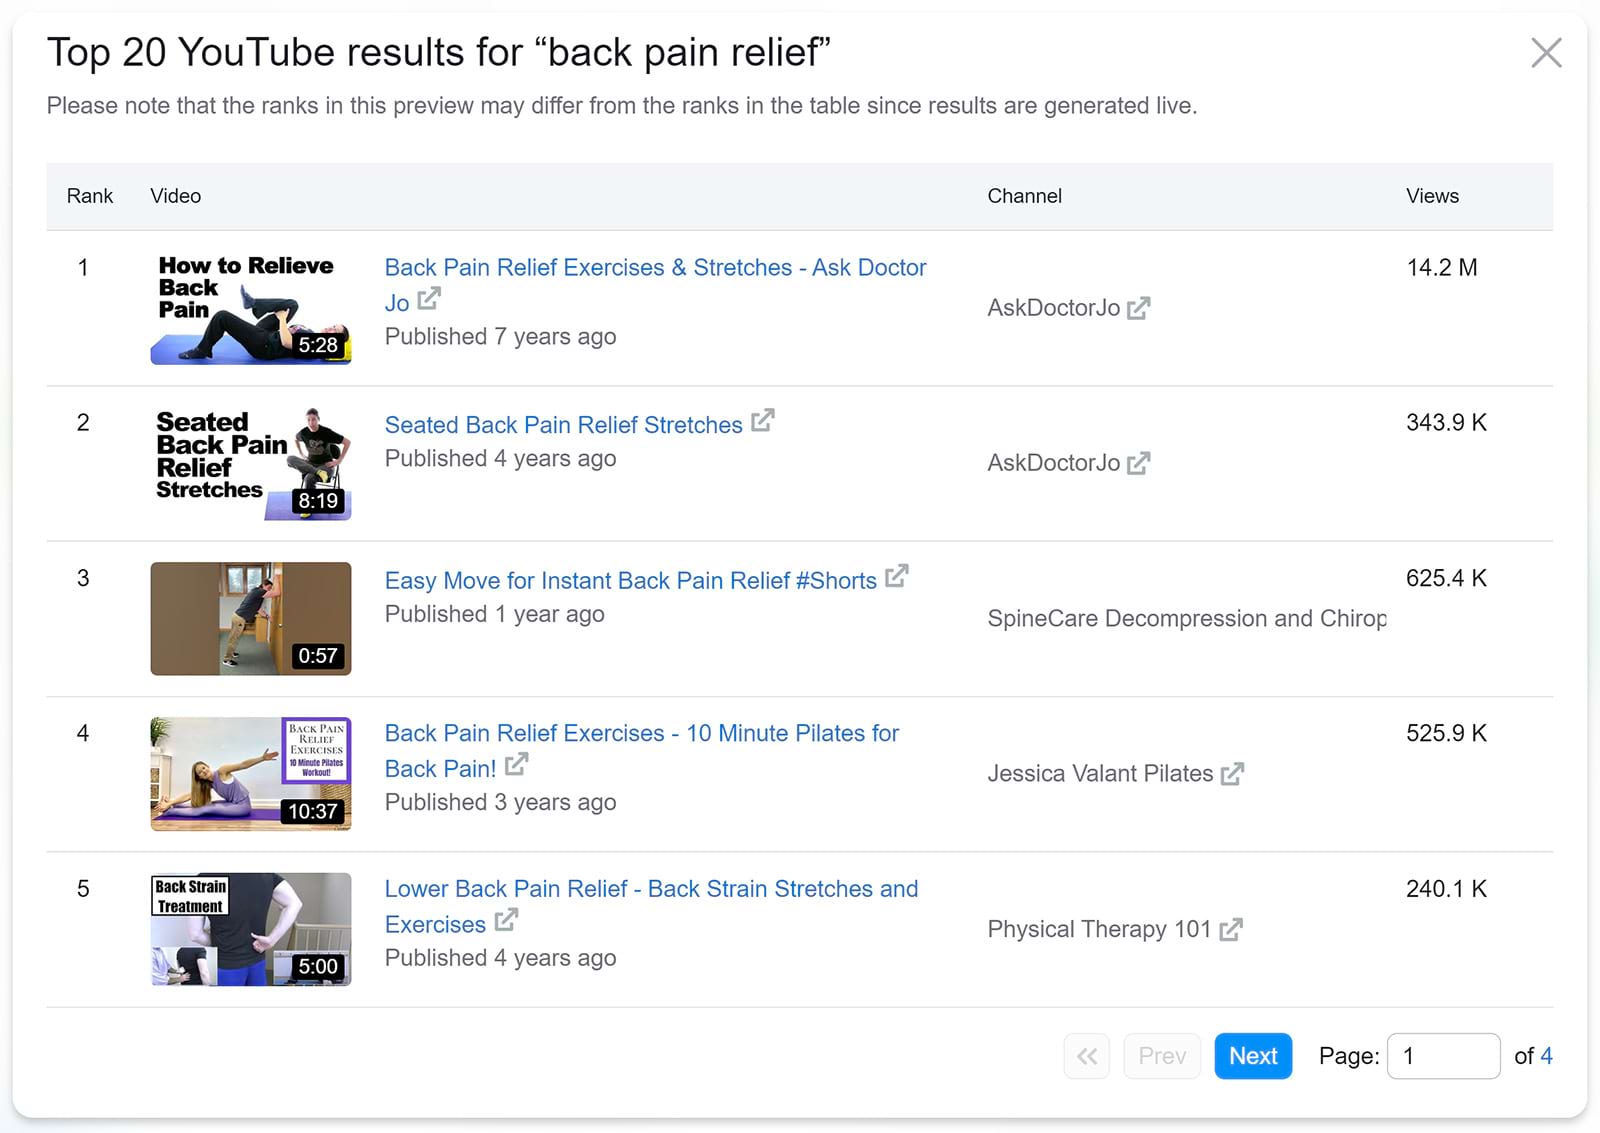 YouTube results preview popup for 'back pain relief'.